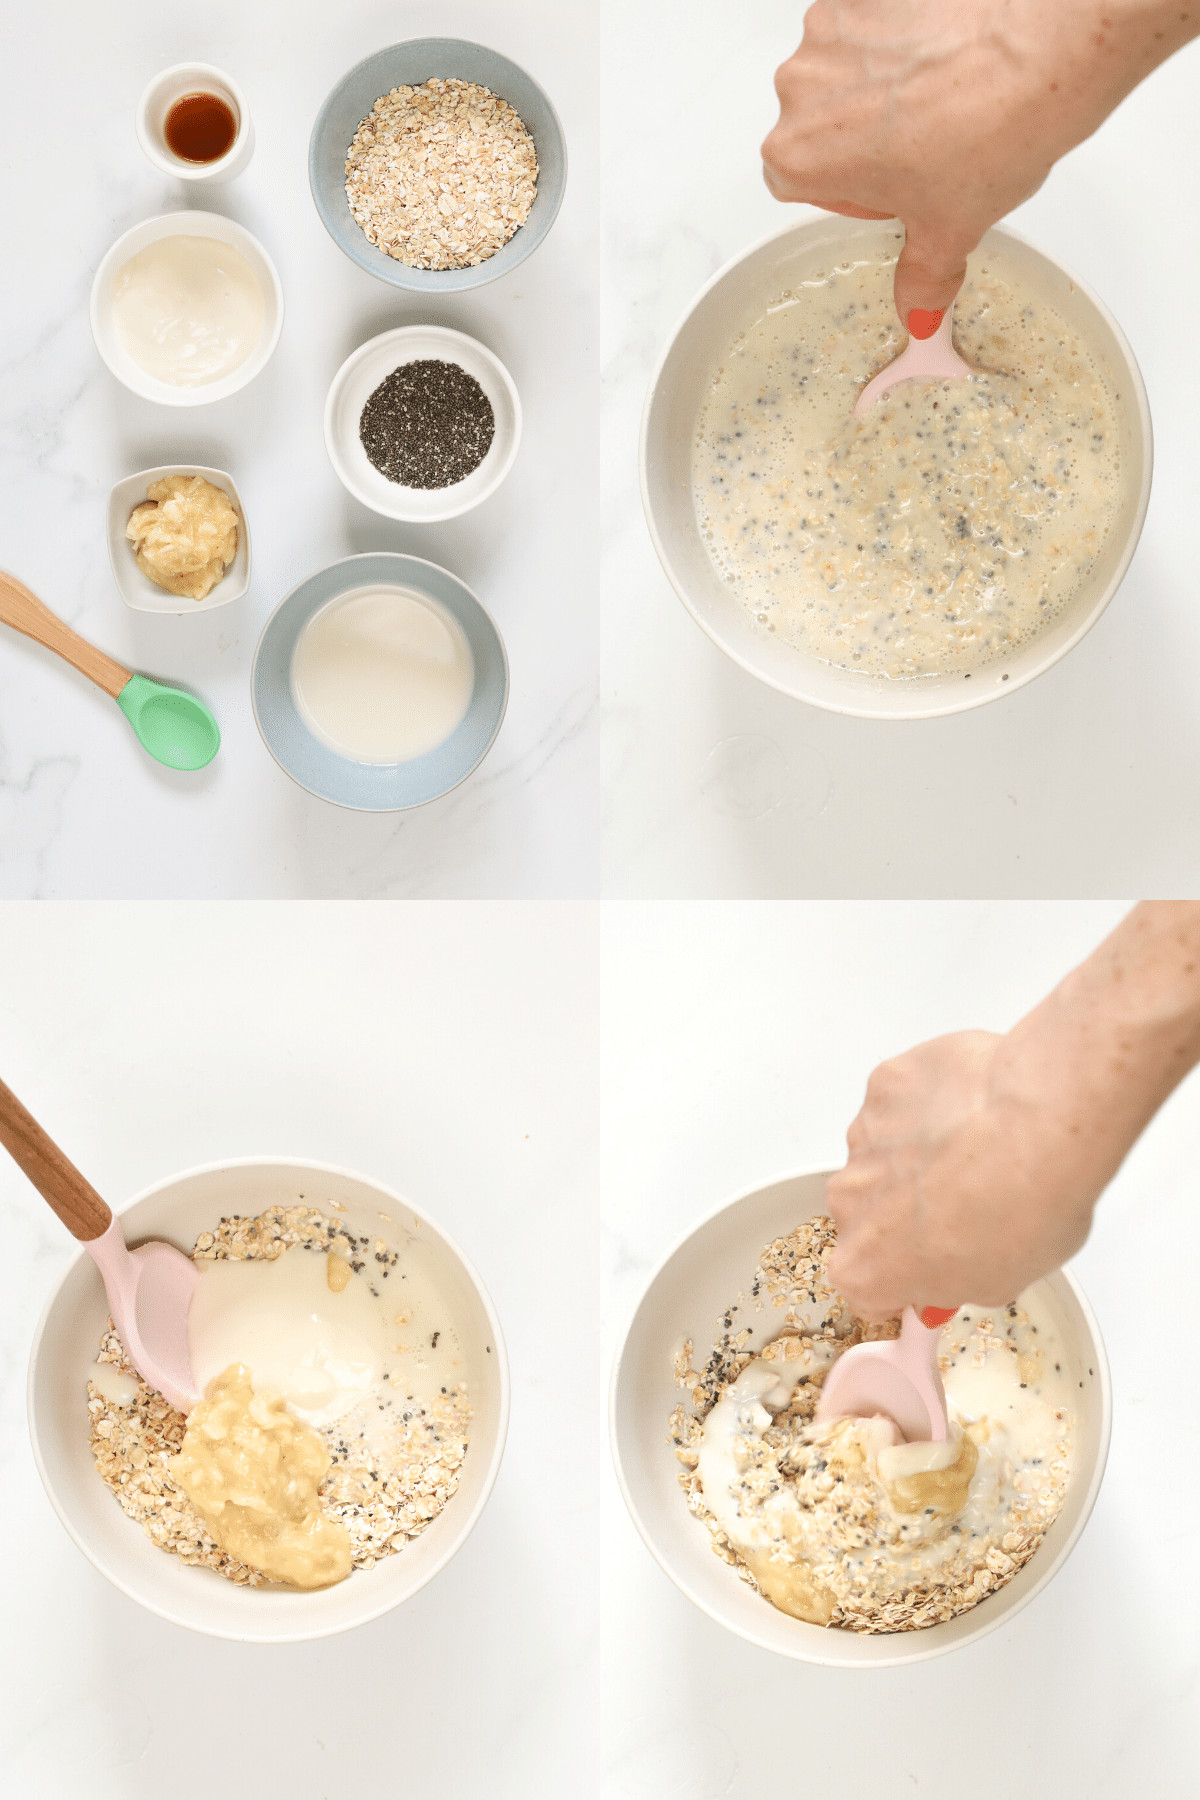 How to make Overnight Oats for babies